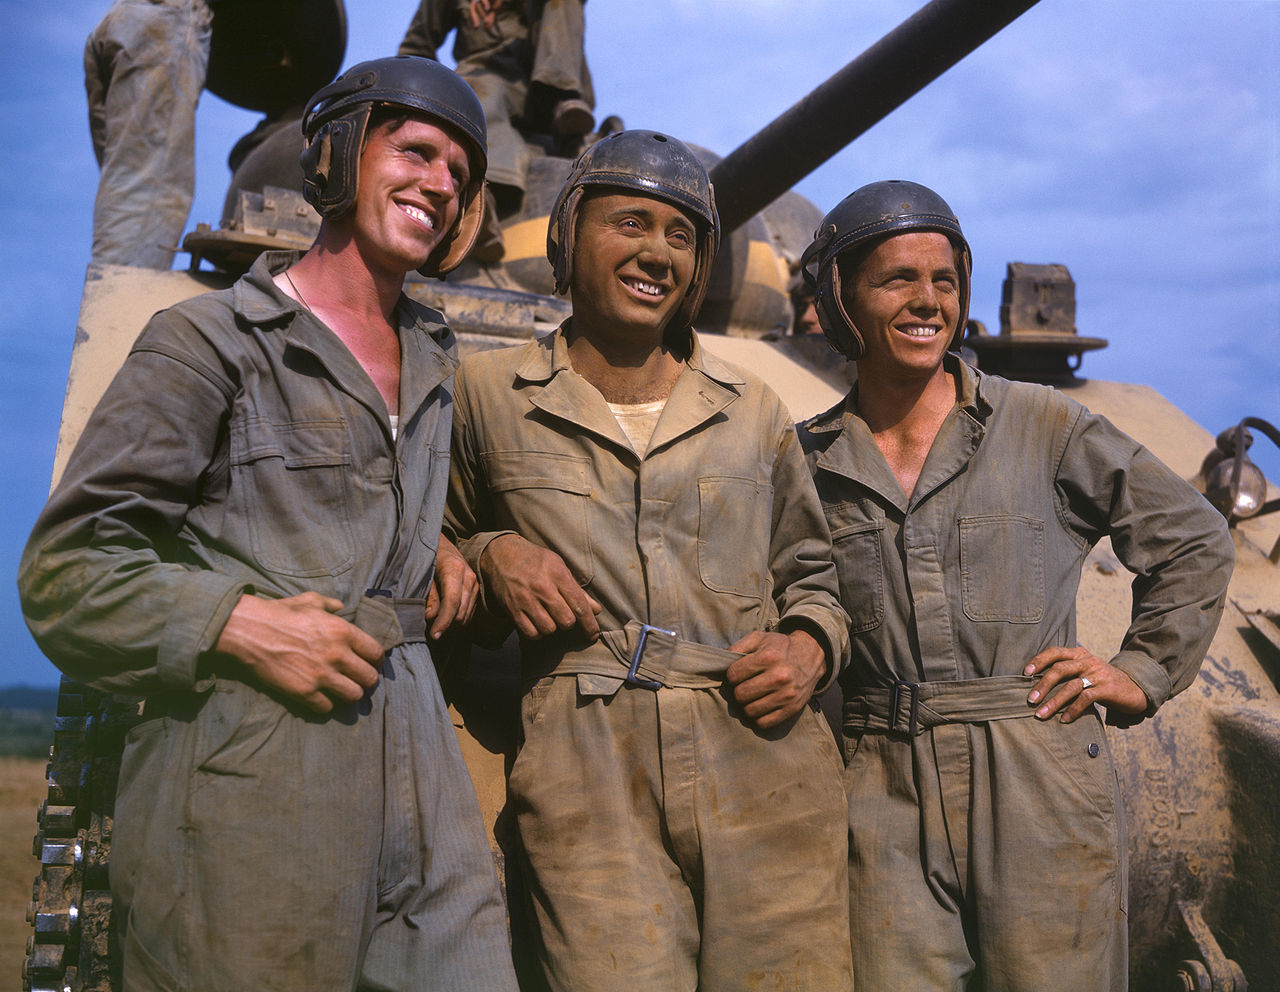 M-4 tank crews of the United States, Ft. Knox, KY, 1942